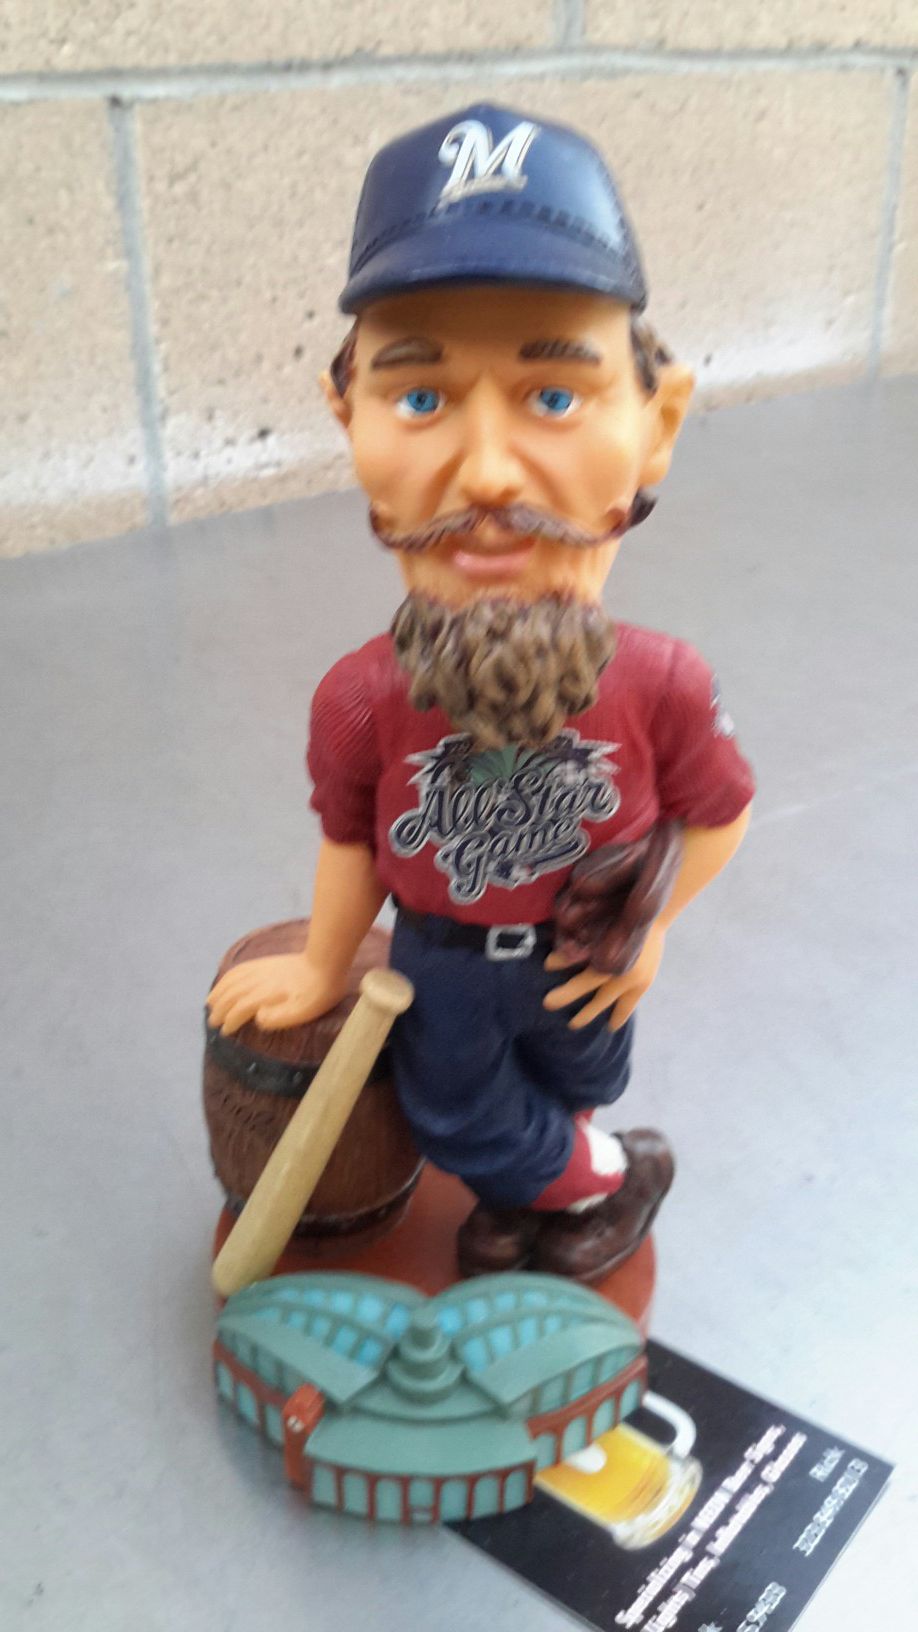 MILWAUKEE BREWERS 2002 ALL-STAR BOBBLEHEAD. ( ALSO PLENTY OF NEON SIGNS / LIGHTS AVAILABLE FOR SALE ). DODGERS BOBBLEHEADS AVAILABLE.